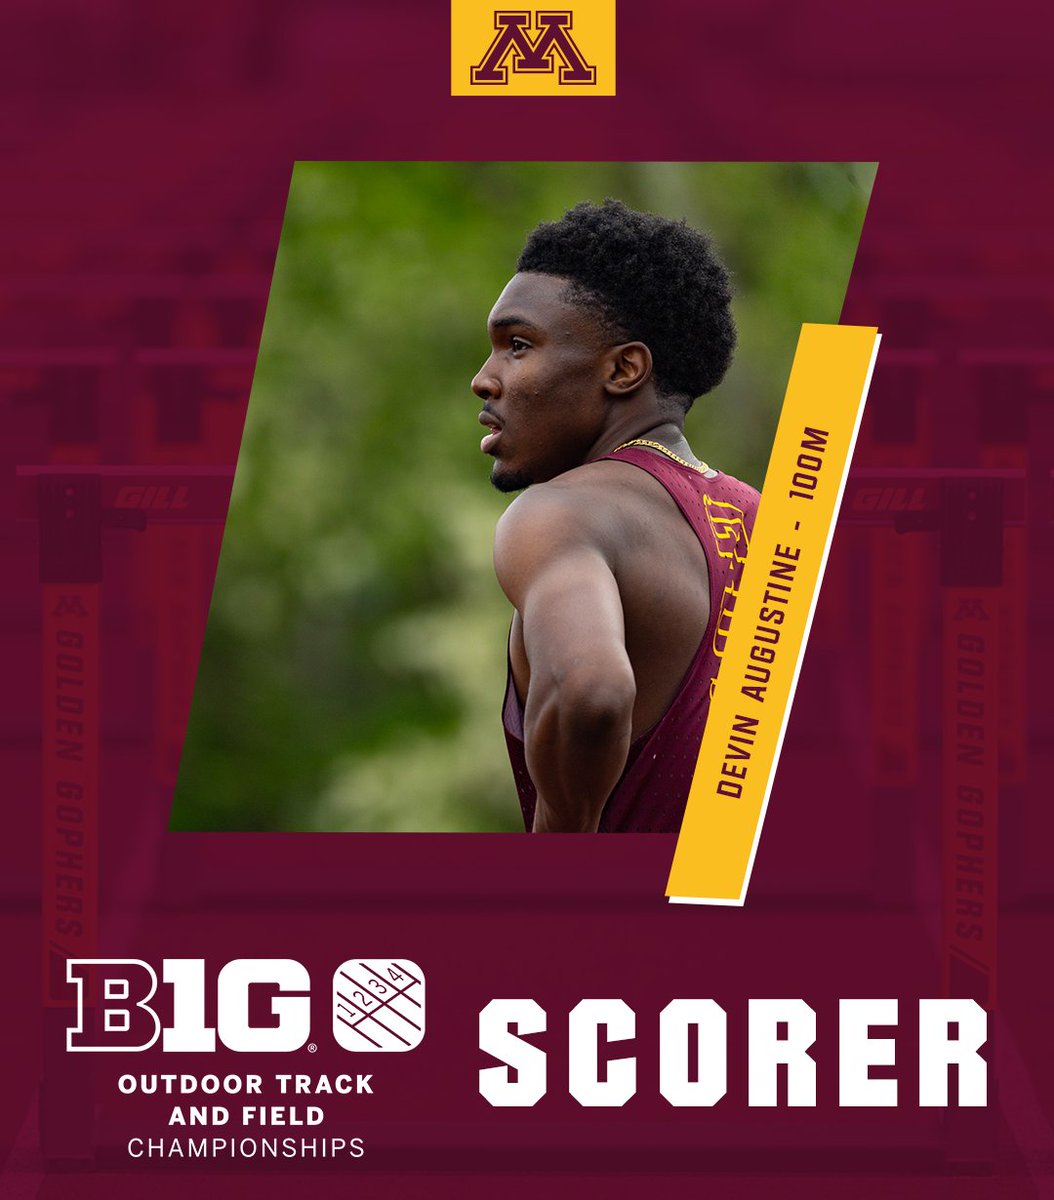 The #Gophers scored 1⃣9⃣ points in the 100m! 🤯

Carlon Hosten runs a lifetime best 10.22 (-0.4 m/s) while Devin Augustine clocks a 10.35 to finish seventh overall in their first @bigten finals. Next up, the 200m final! #B1GTF